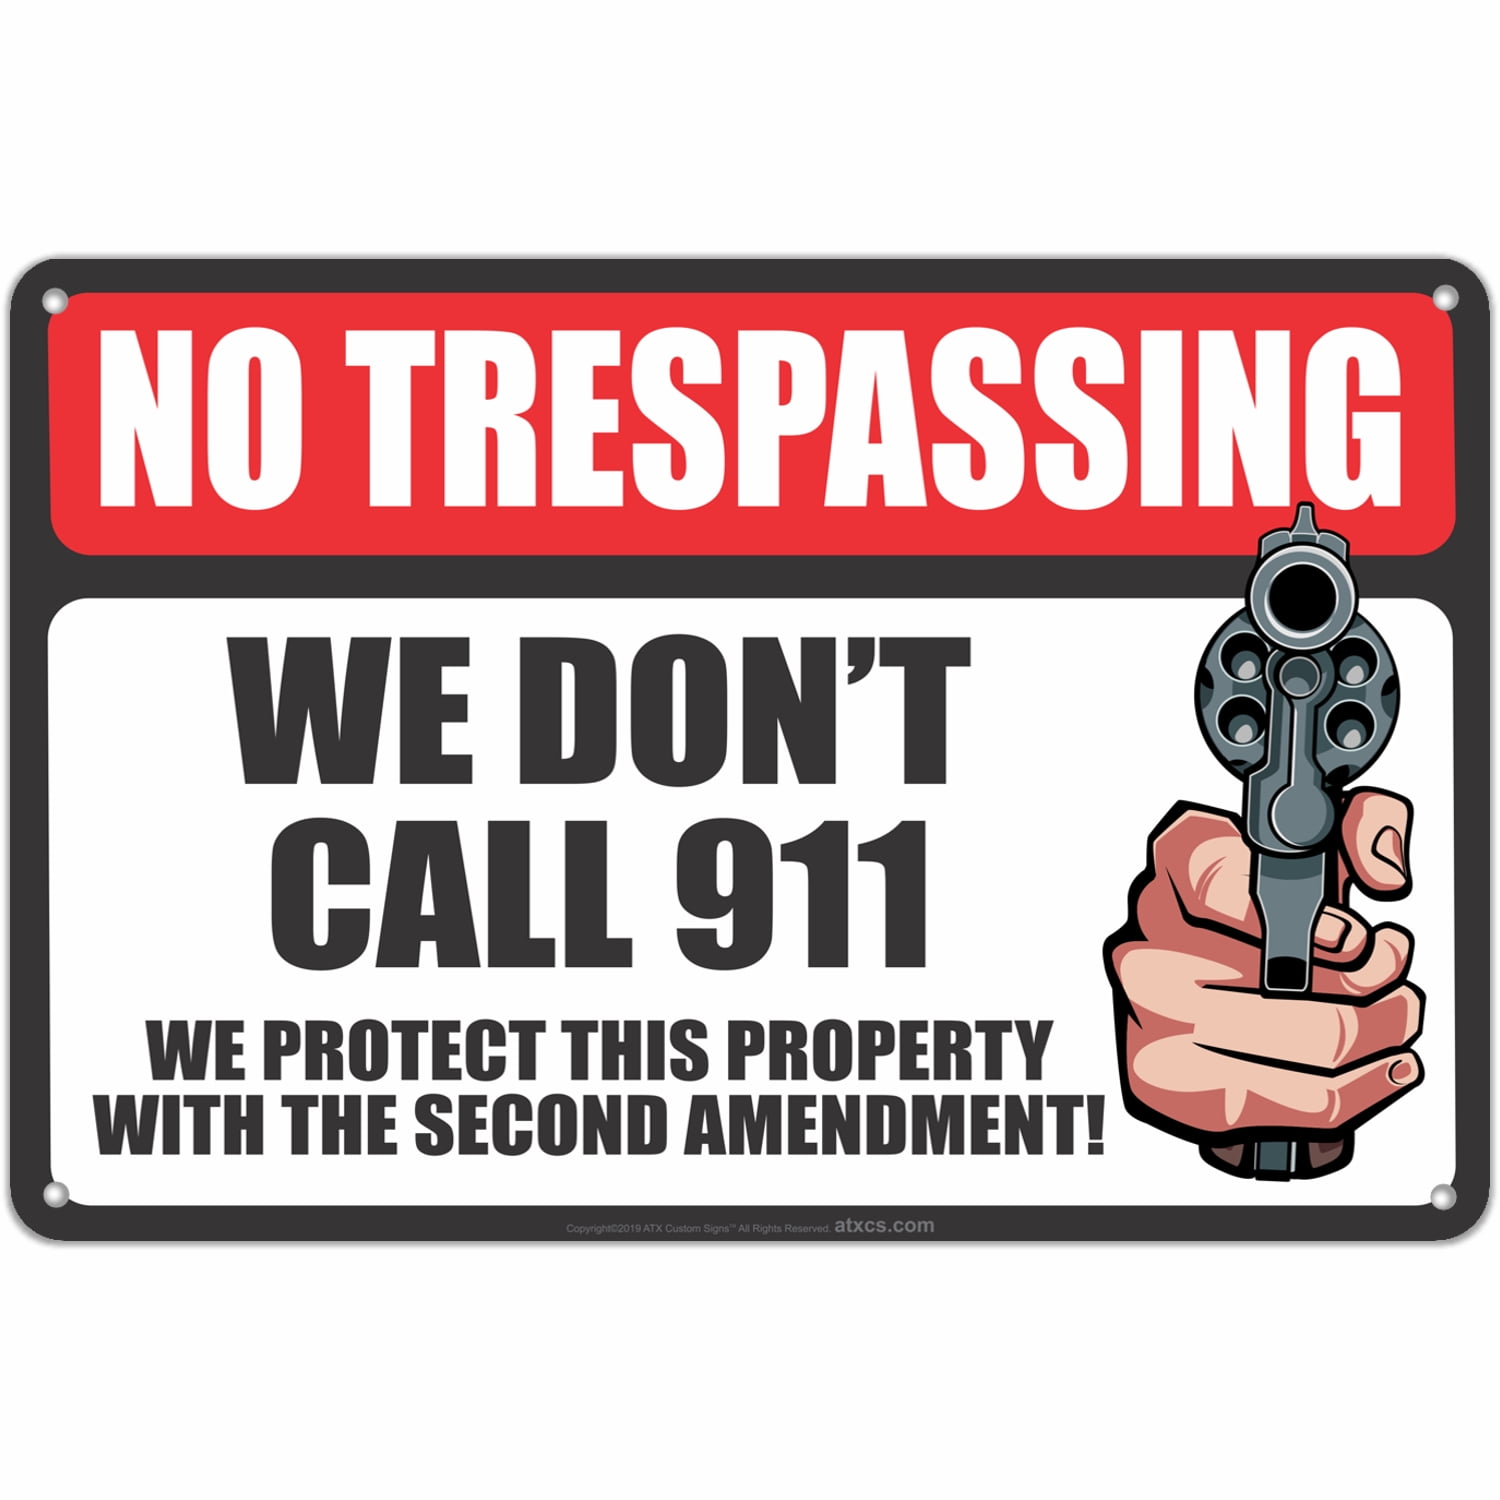 PRIVATE PROPERTY NO TRESPASSING 8X12 Plastic Coroplast Sign w/Stake Security 